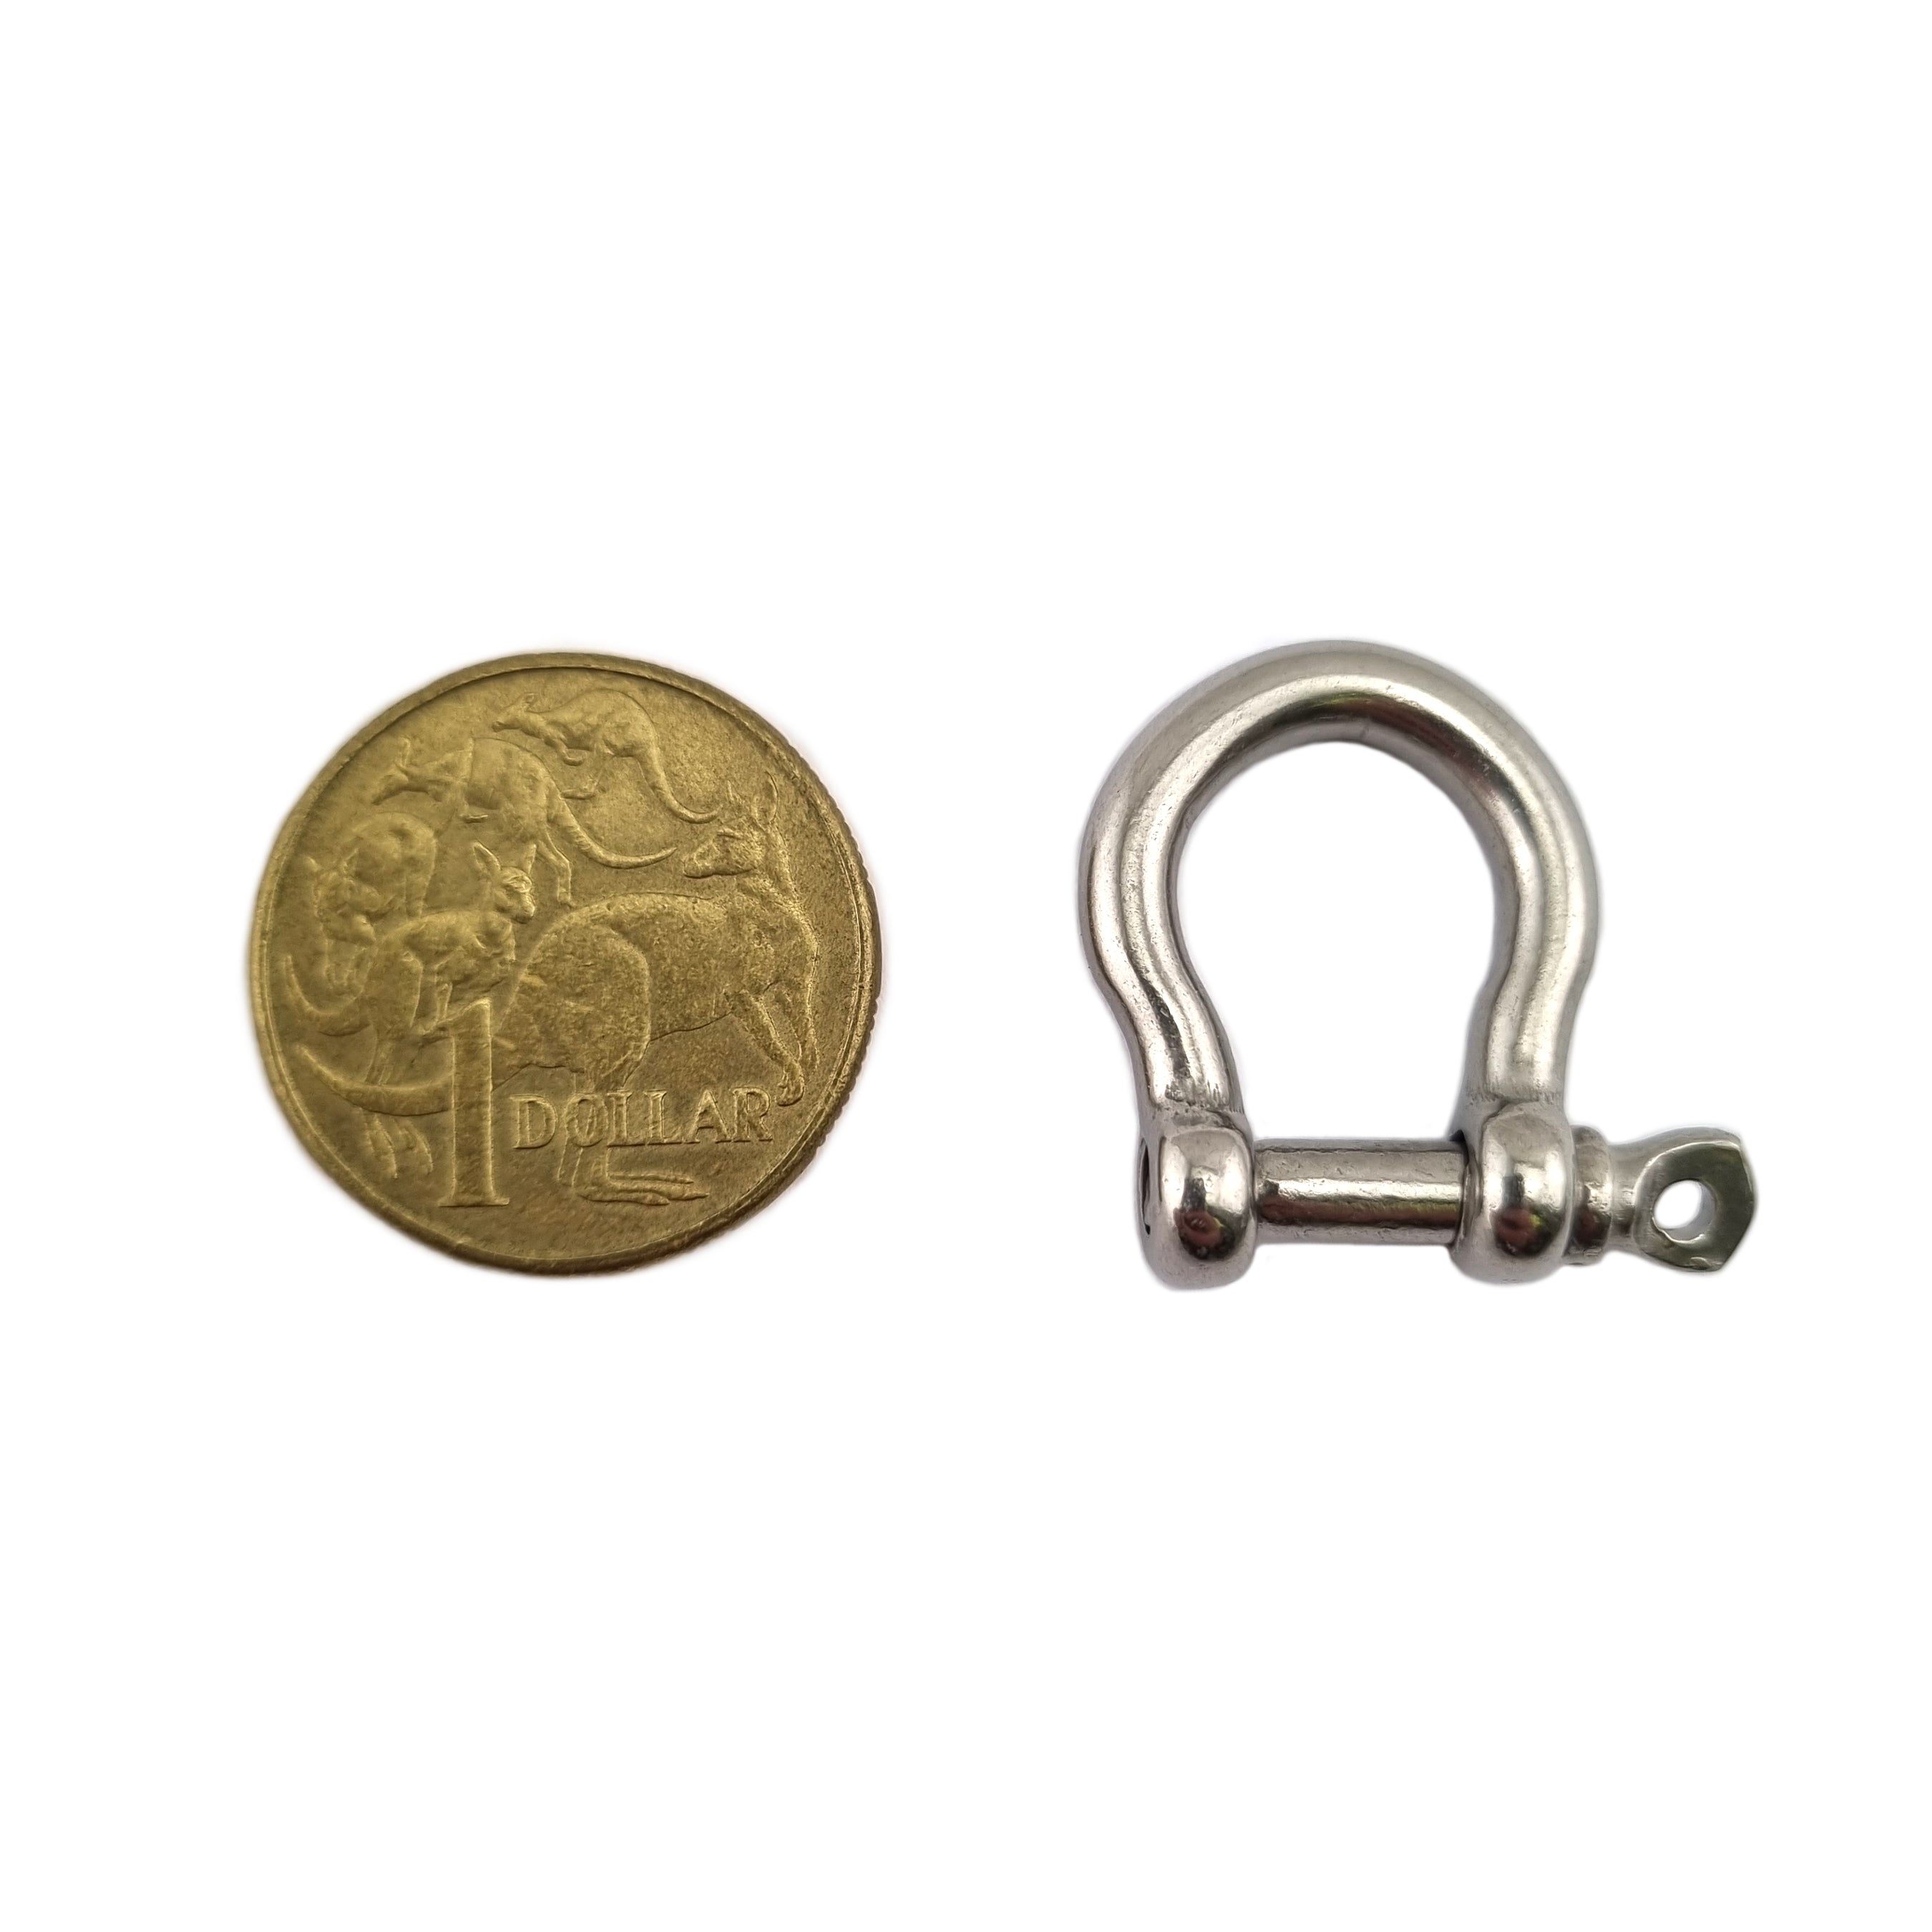 4mm Bow Shackle in Stainless Steel. Shop balustrade chain.com.au